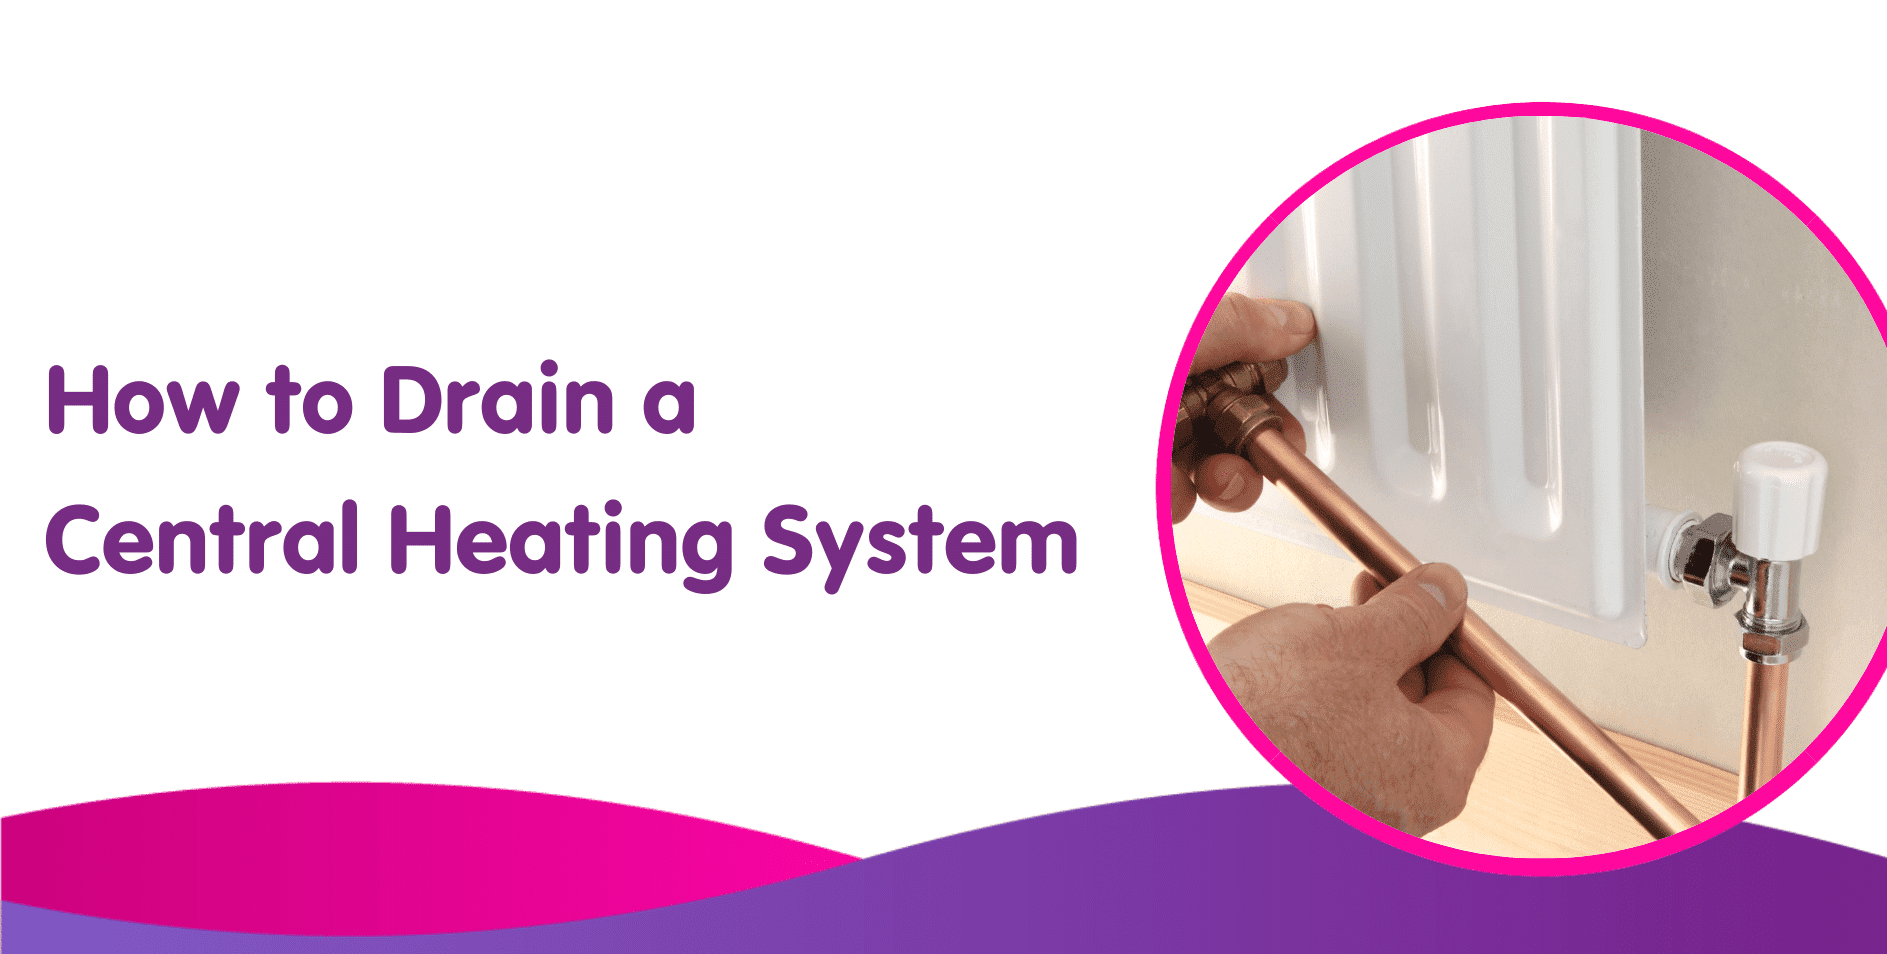 How to Drain a Central Heating System